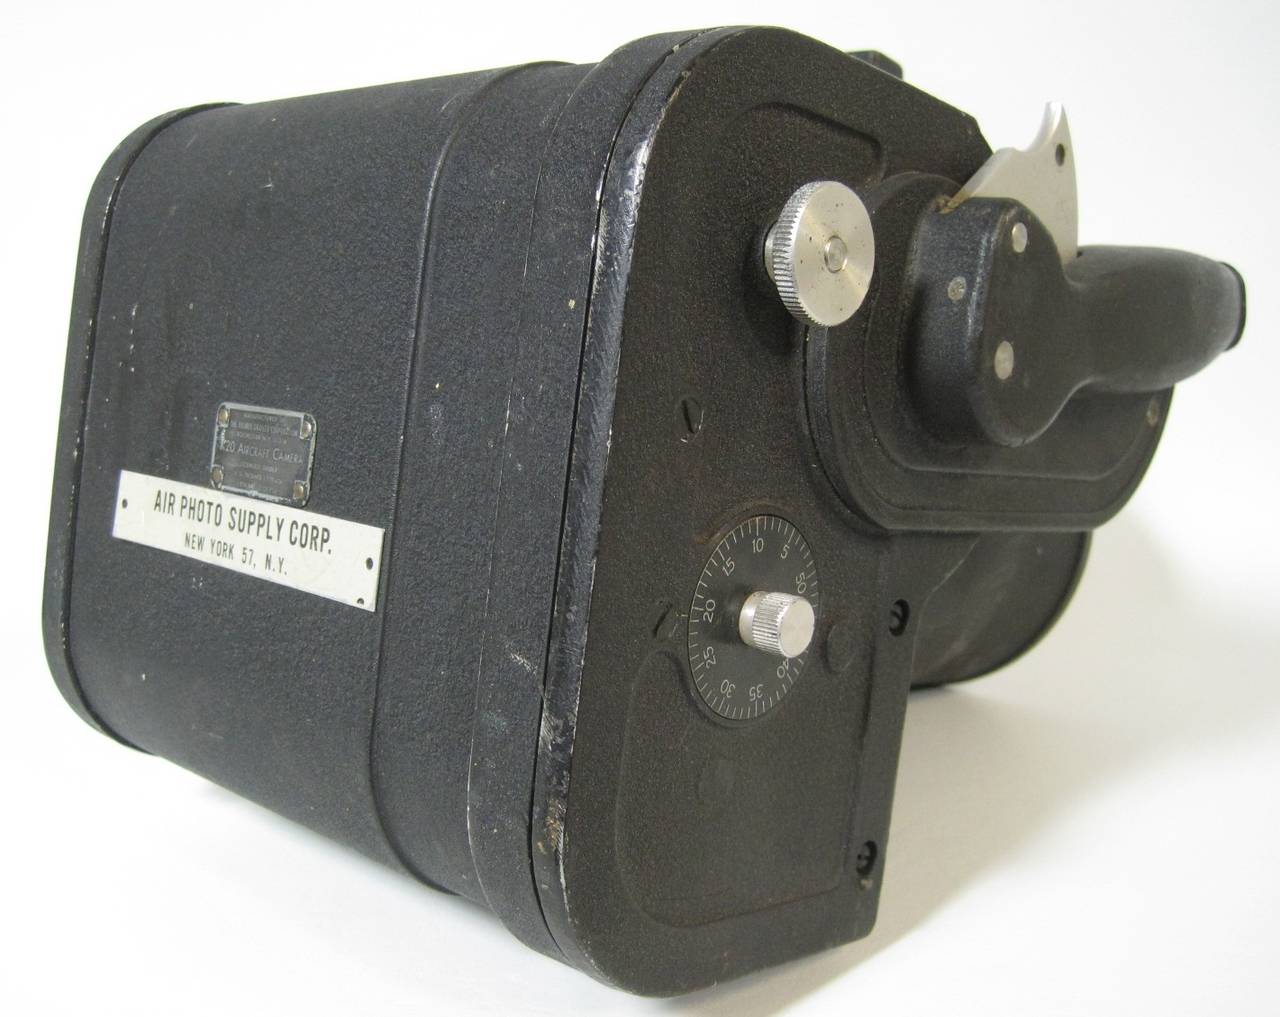 American Military Aviation Aerial Photography Camera Used During the Second World War